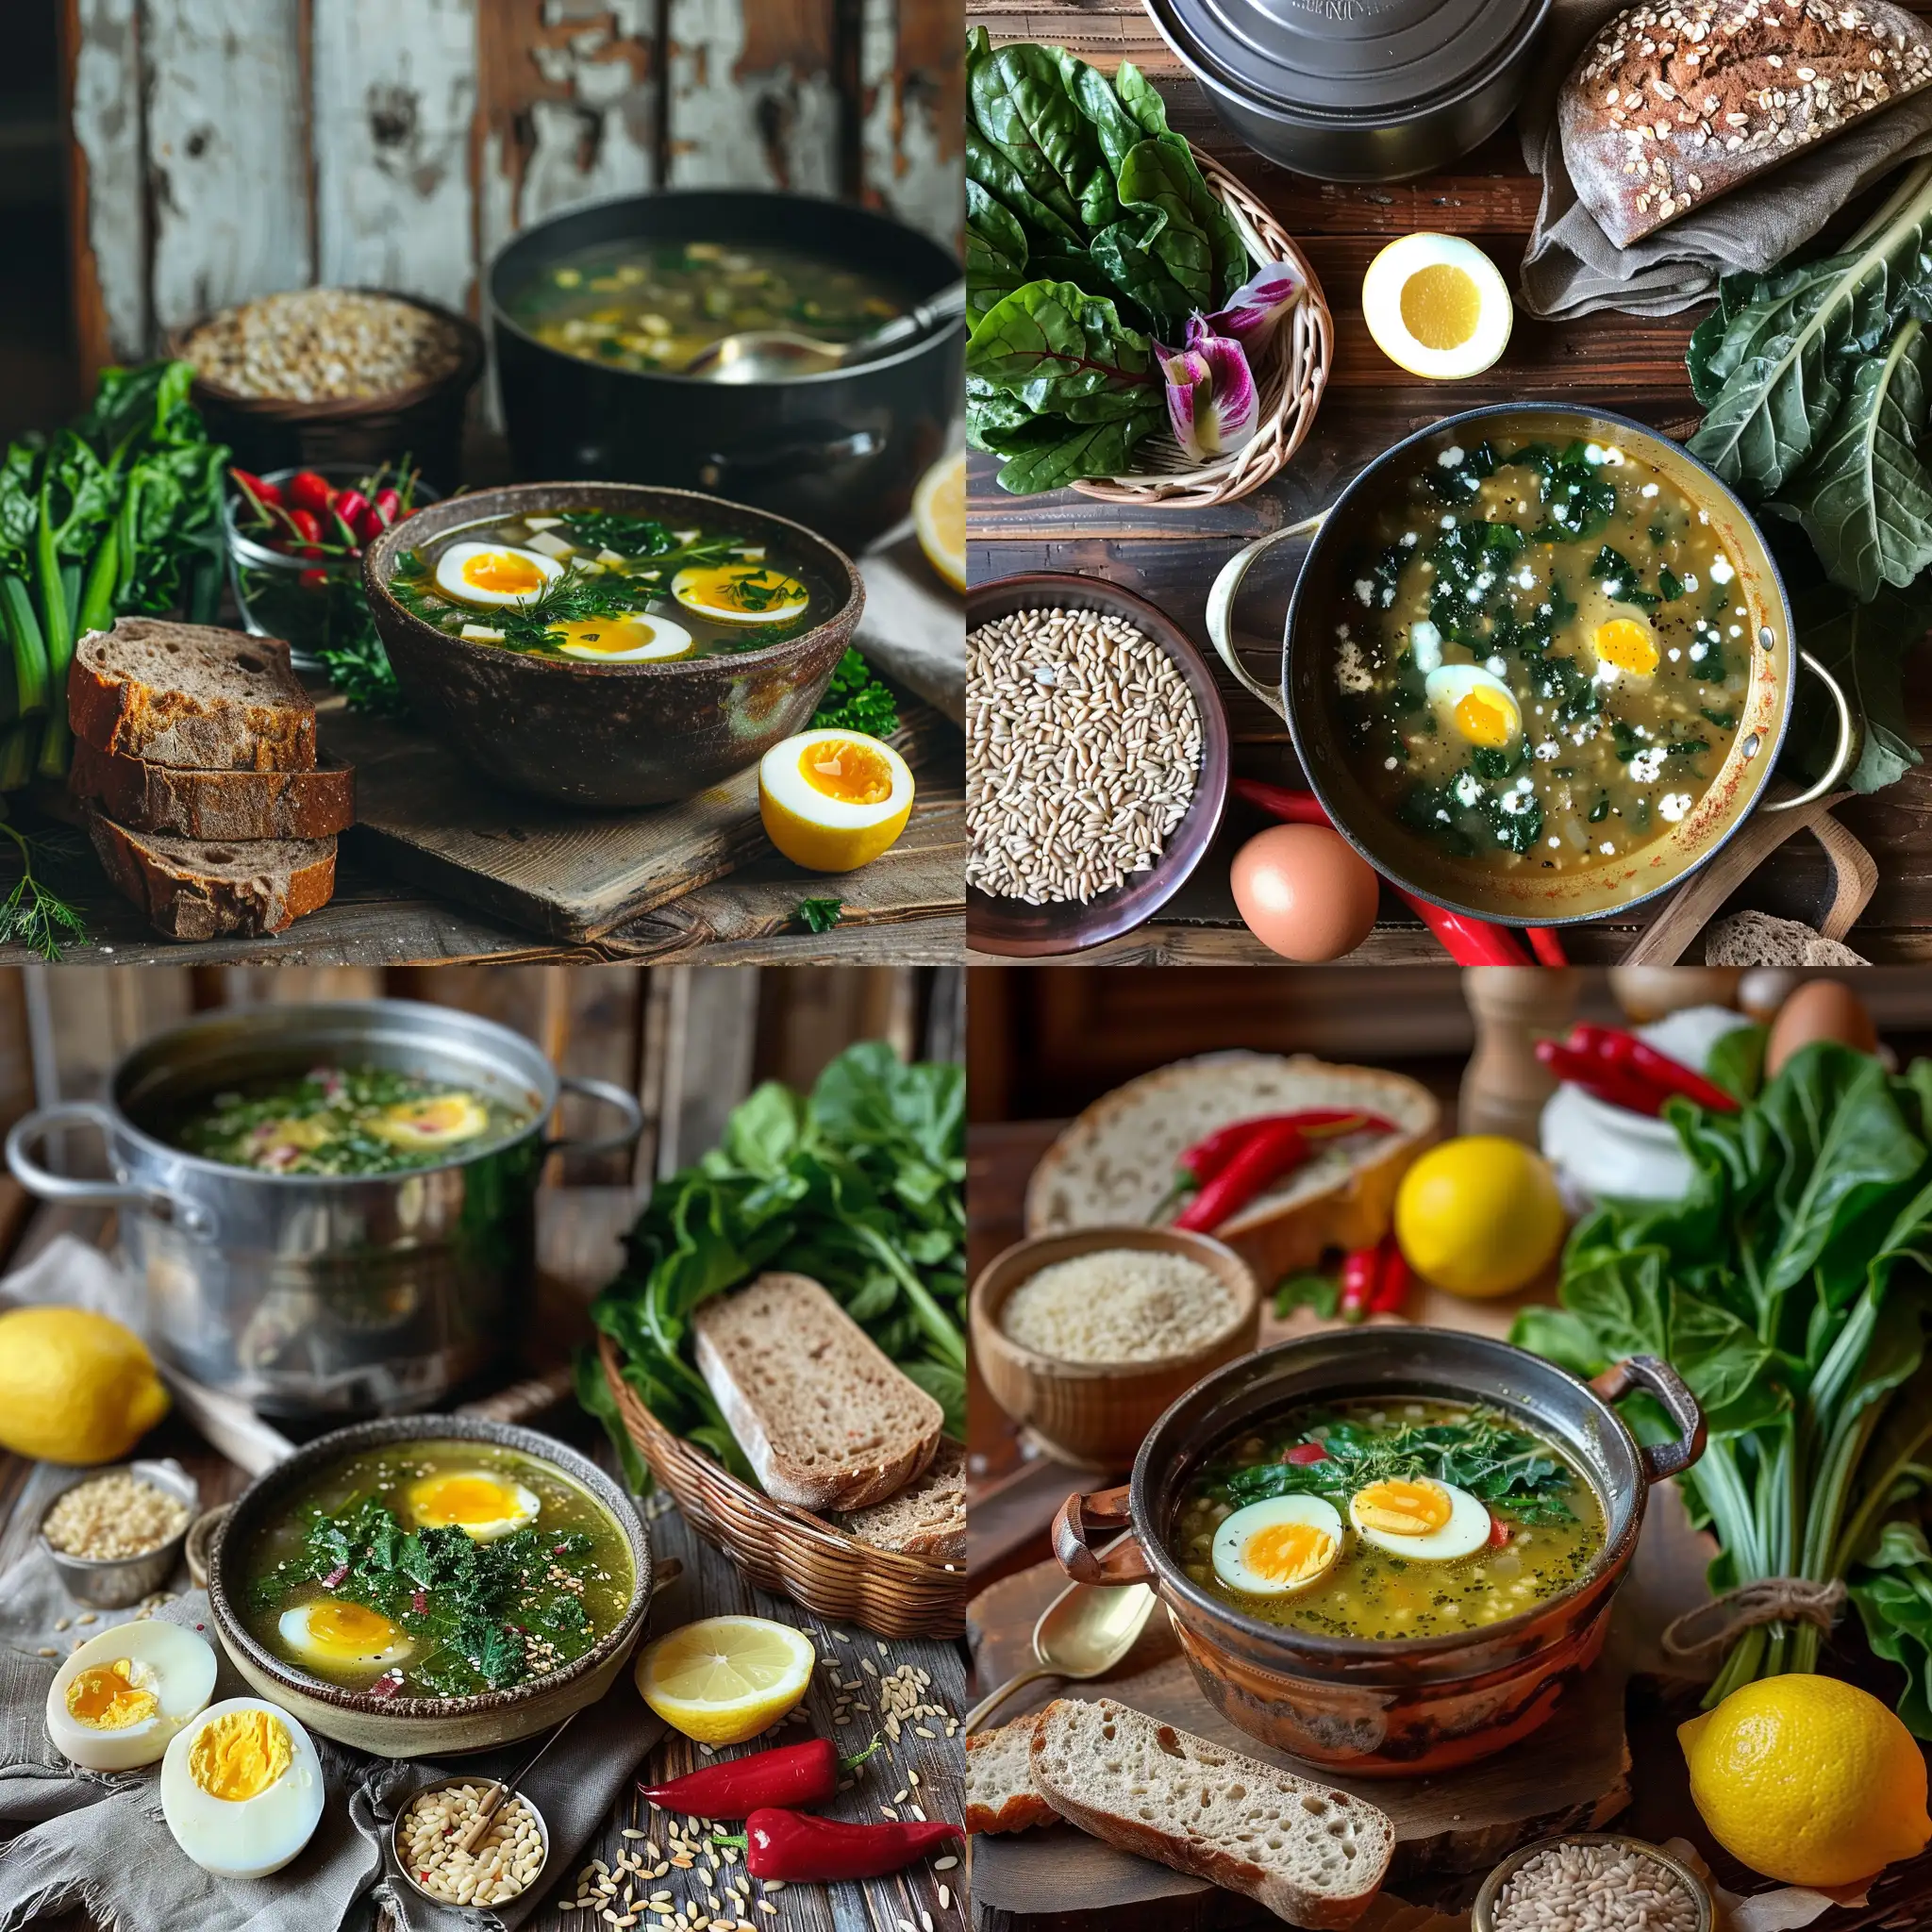 Sorrel-Soup-with-Boiled-Eggs-and-Rye-Bread-on-Wooden-Table